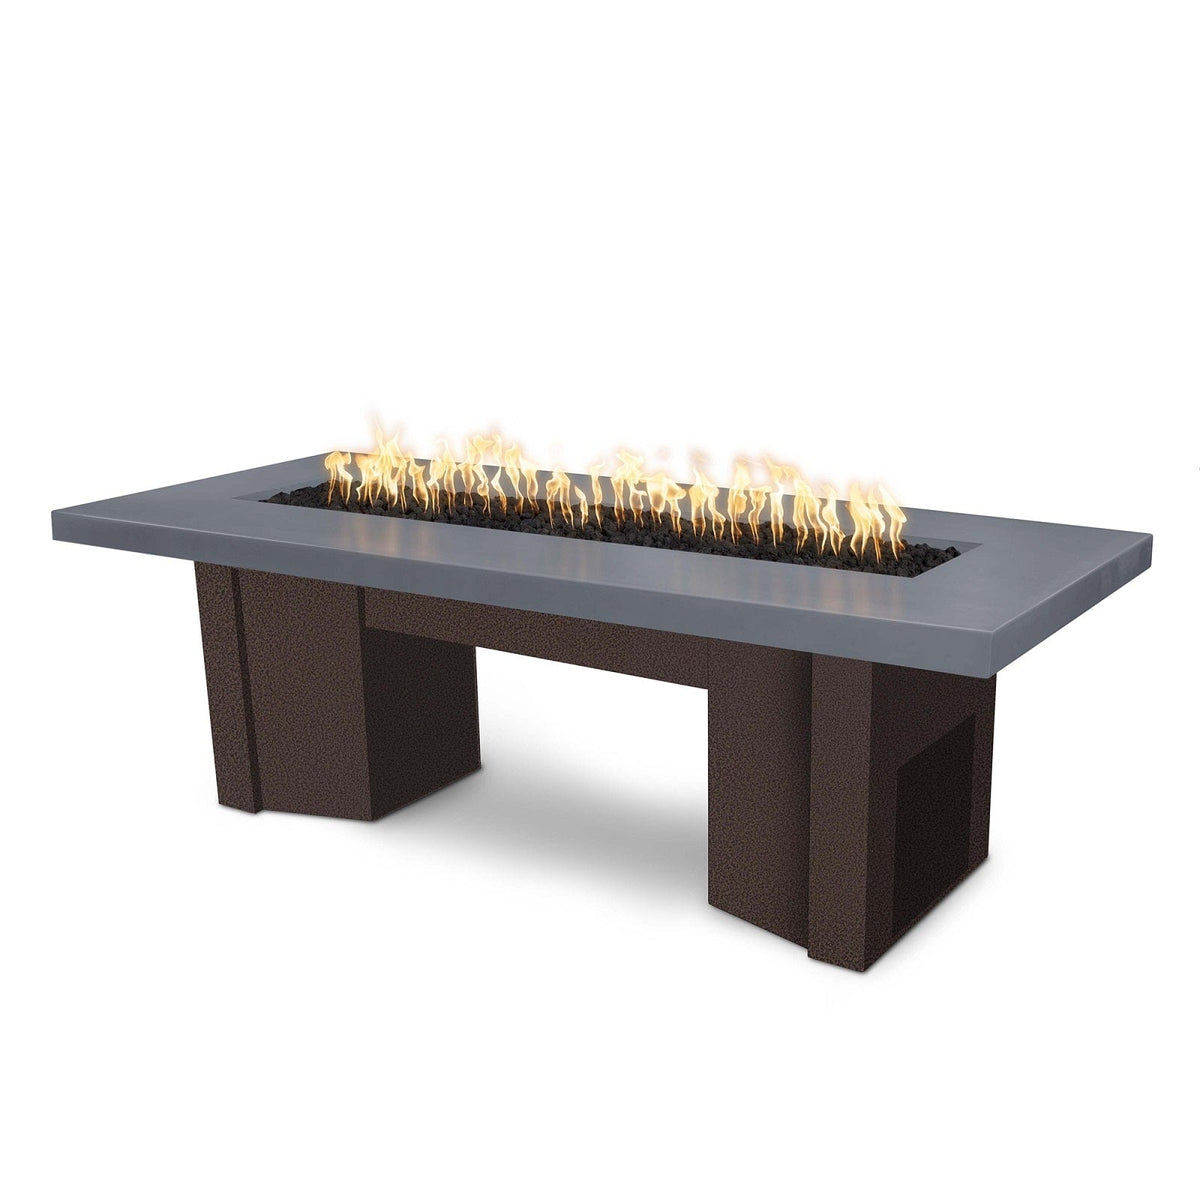 The Outdoor Plus Fire Features Gray (-GRY) / Copper Vein Powder Coated Steel (-CPV) The Outdoor Plus 78&quot; Alameda Fire Table Smooth Concrete in Liquid Propane - 12V Electronic Ignition / OPT-ALMGFRC78E12V-LP